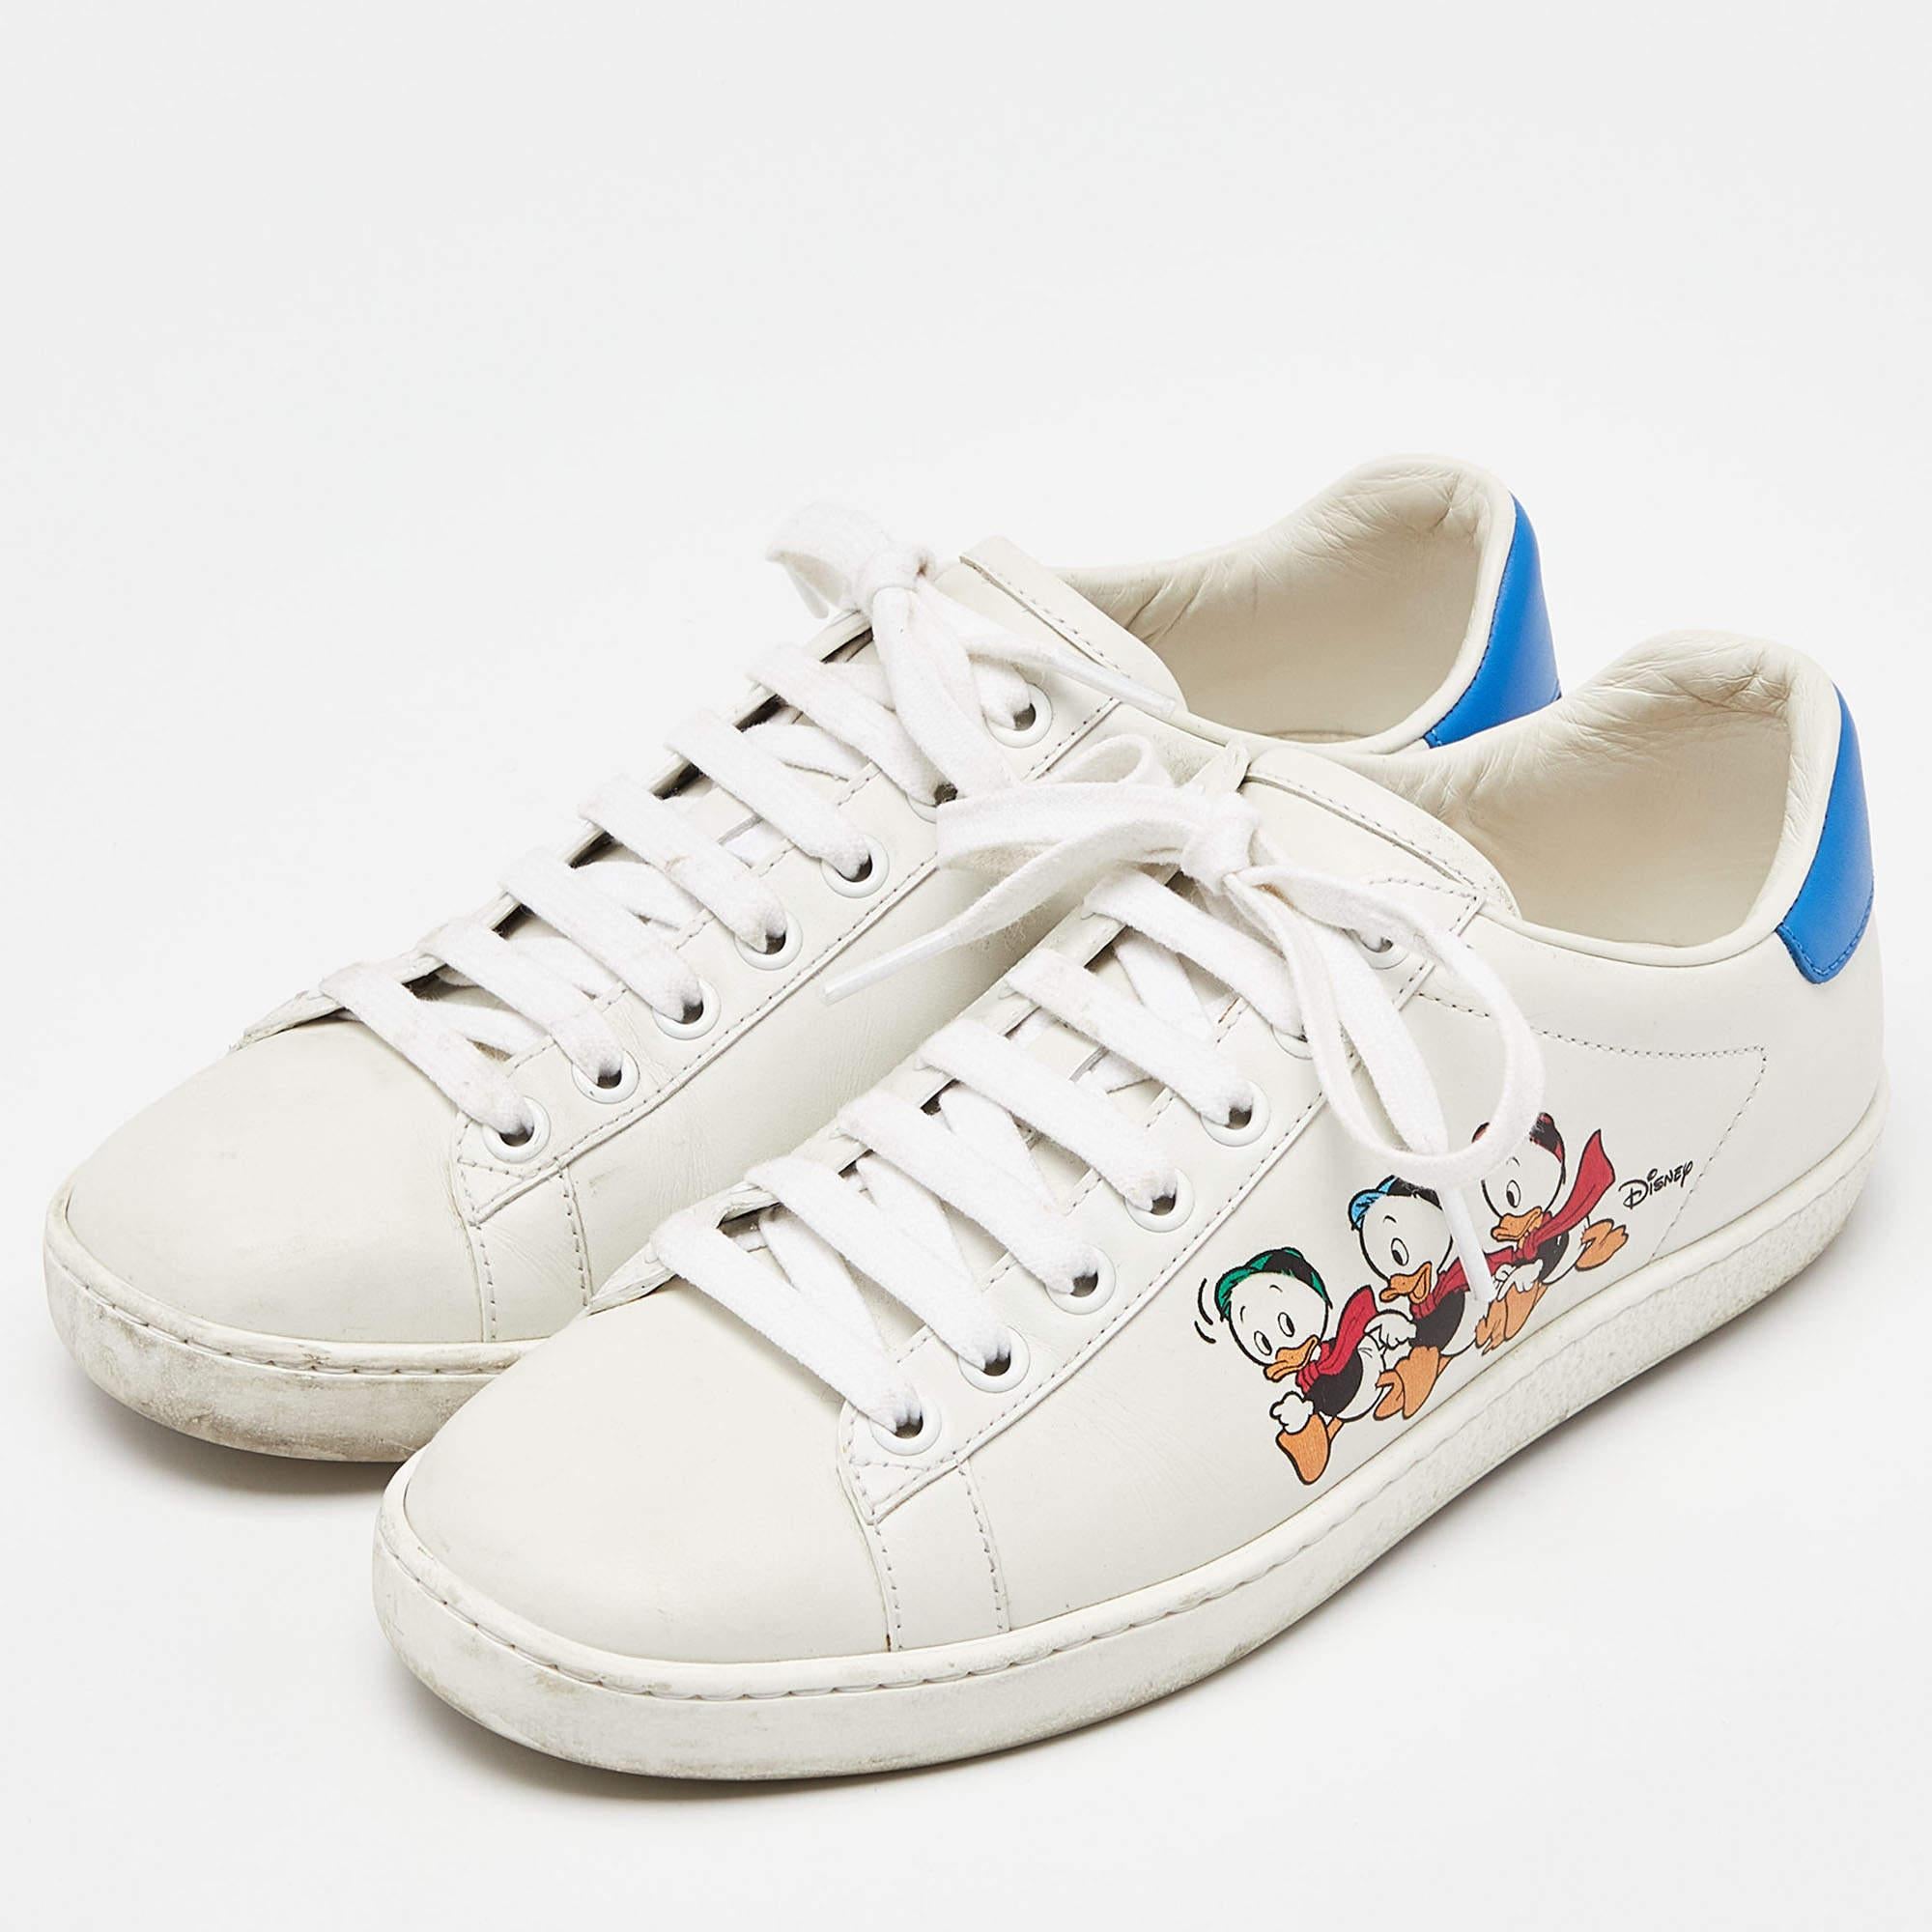 Gucci x Disney White/Blue Leather Huey, Dewey and Louie Ace Sneakers Size 36 For Sale 1